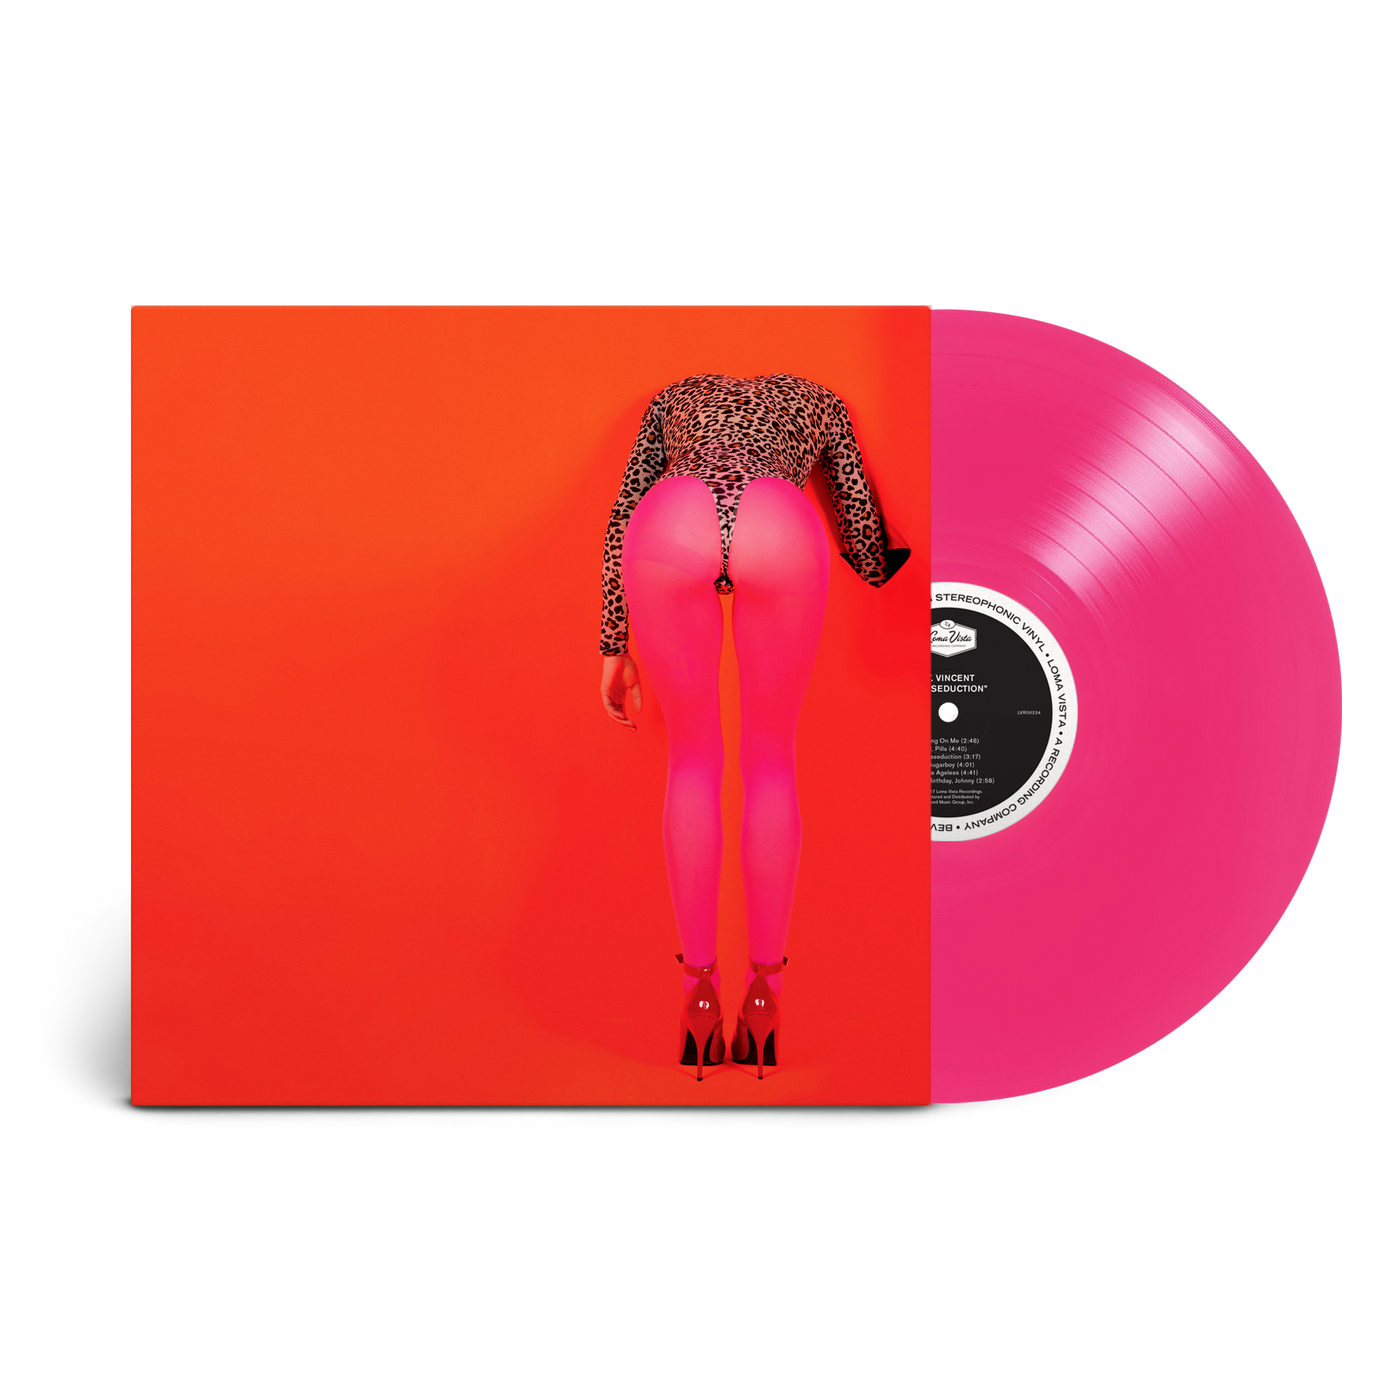 Limited "Anniversary Edition" Neon Coral Masseduction LP